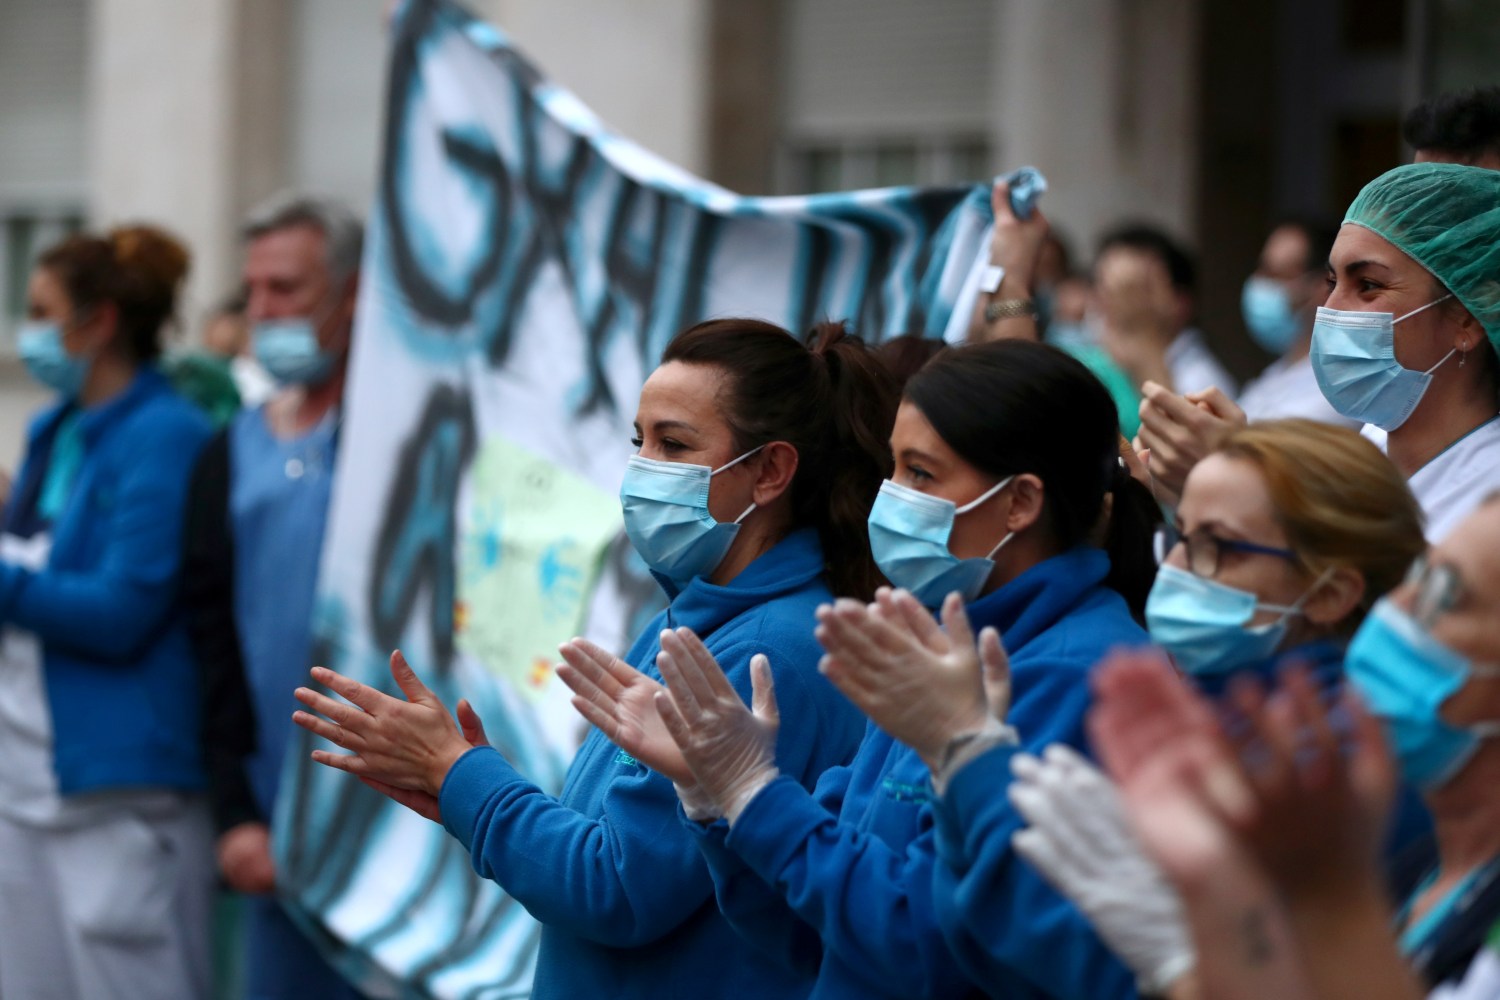 Medical staff from Fundacion Jimenez Diaz hospital react as neighbours applaud from their balconies in support for healthcare workers, amid the coronavirus disease (COVID-19) outbreak, in Madrid, Spain, March 30, 2020. REUTERS/Sergio Perez